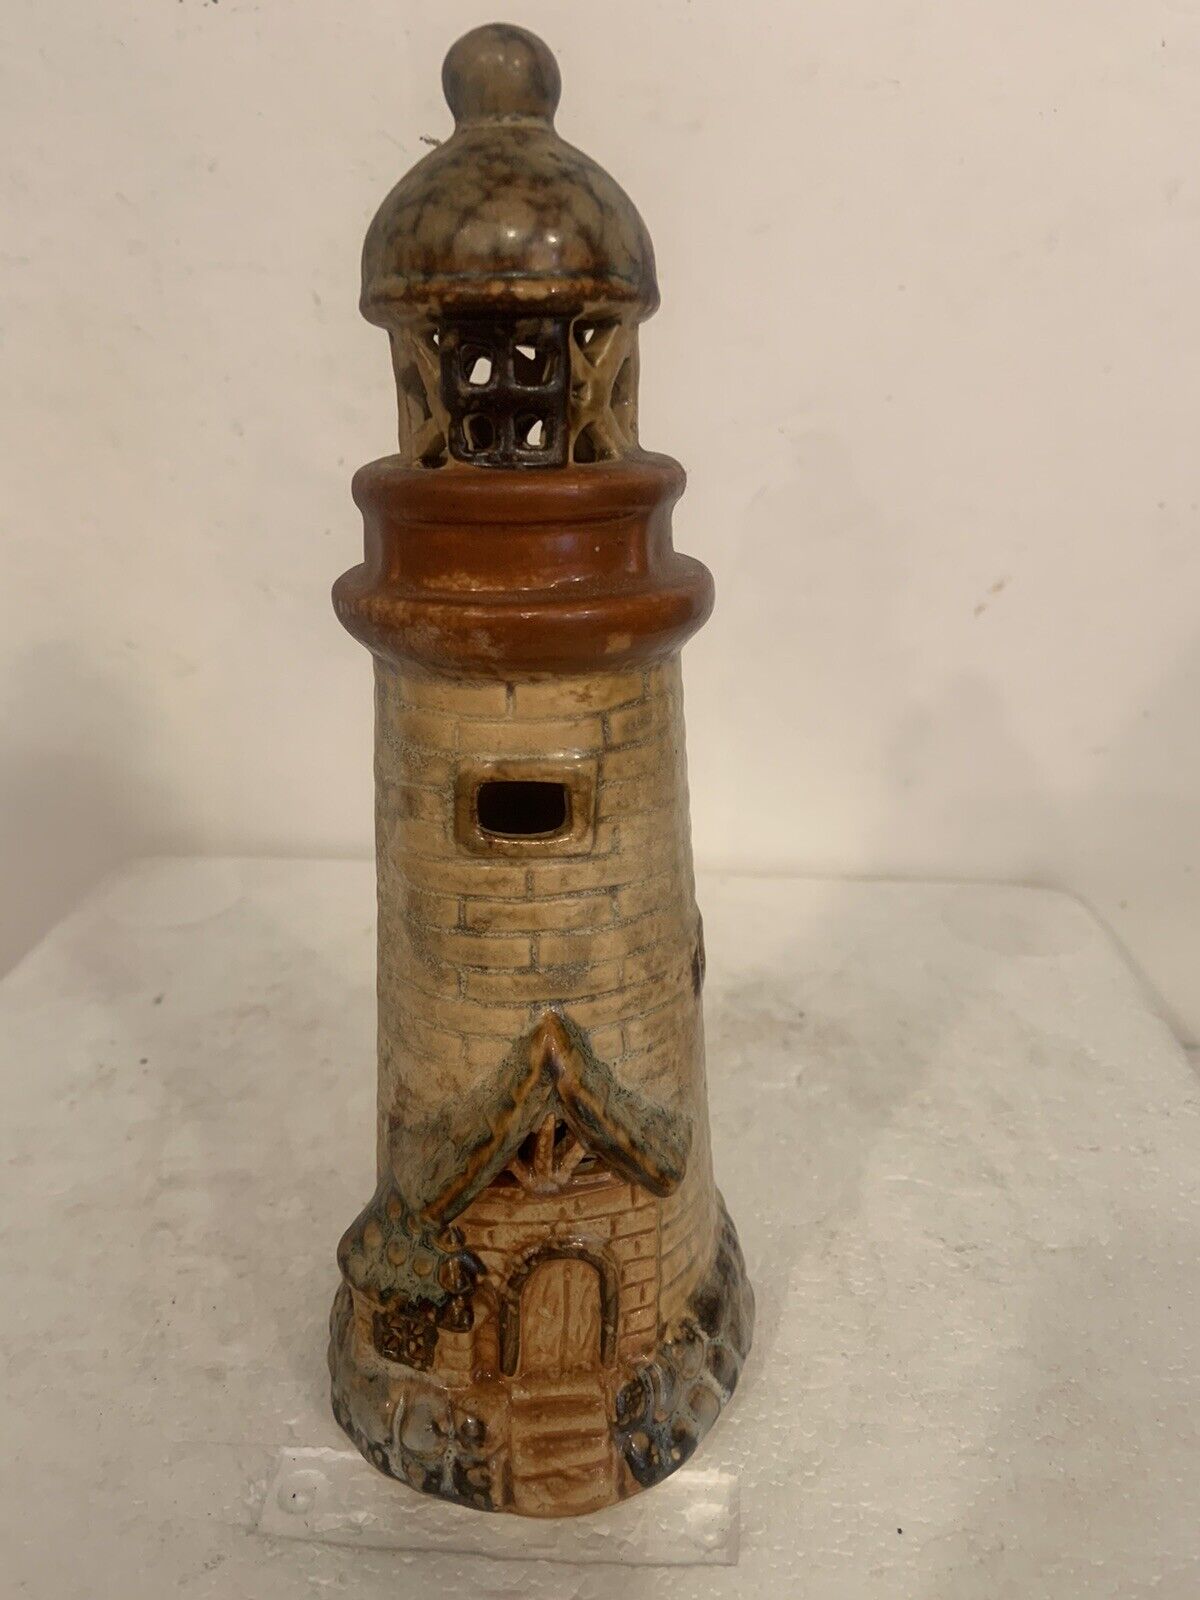 Vntg Lighthouse Art Pottery Figurine 8” Ceramic Brown Glossy Detailed See Photos